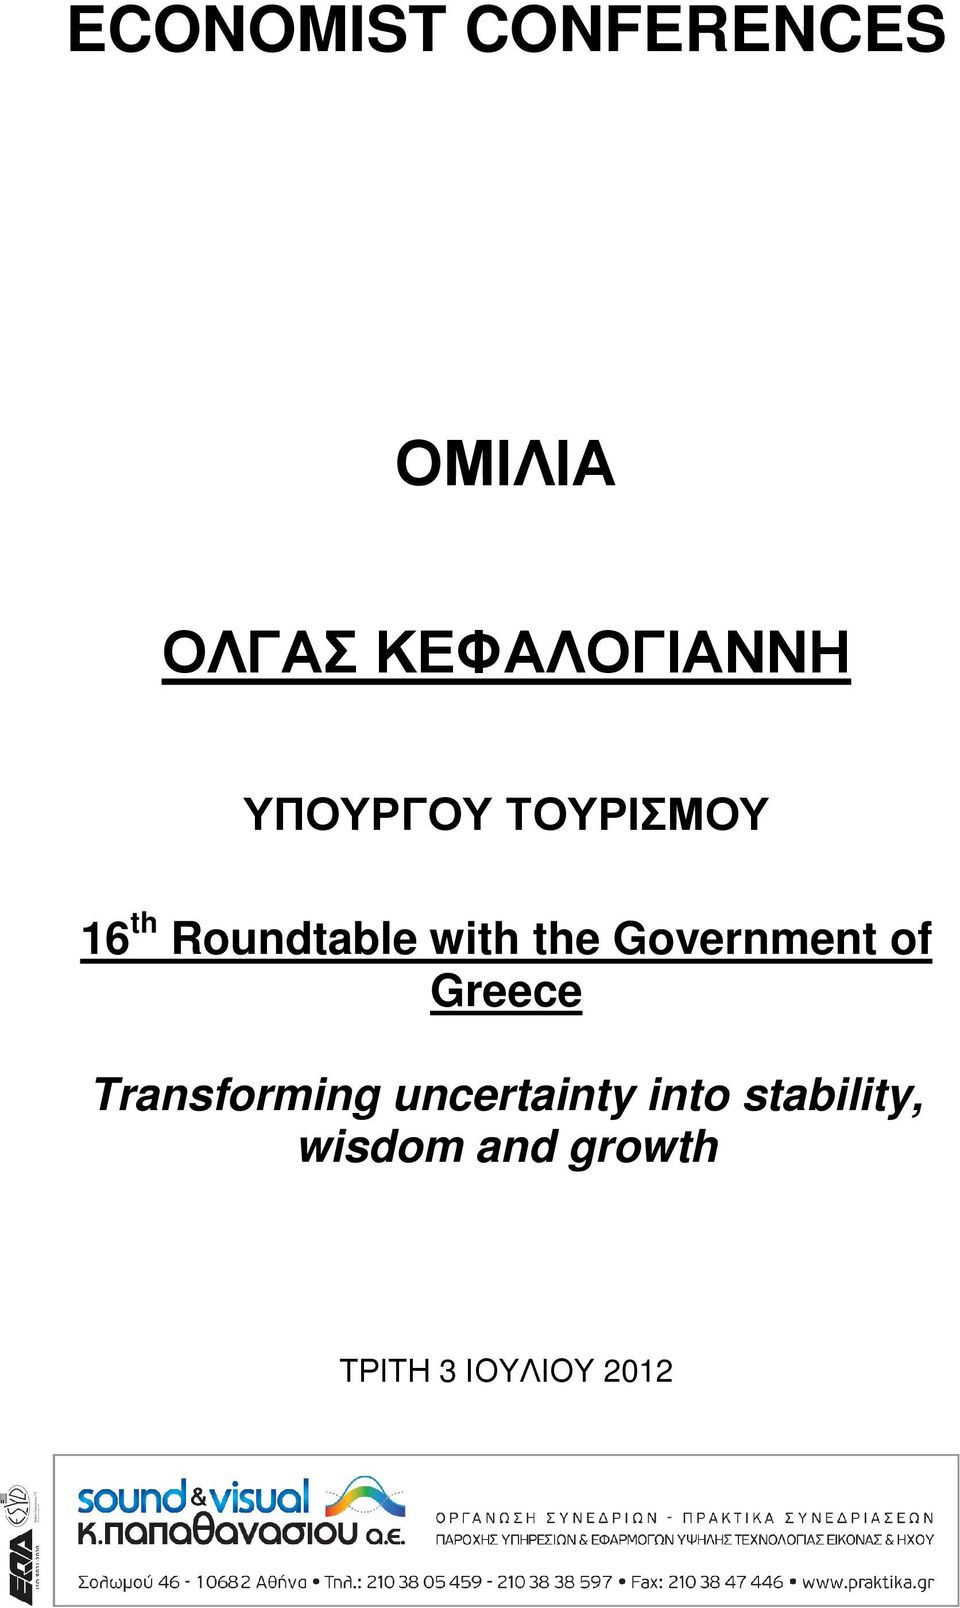 Government of Greece Transforming uncertainty